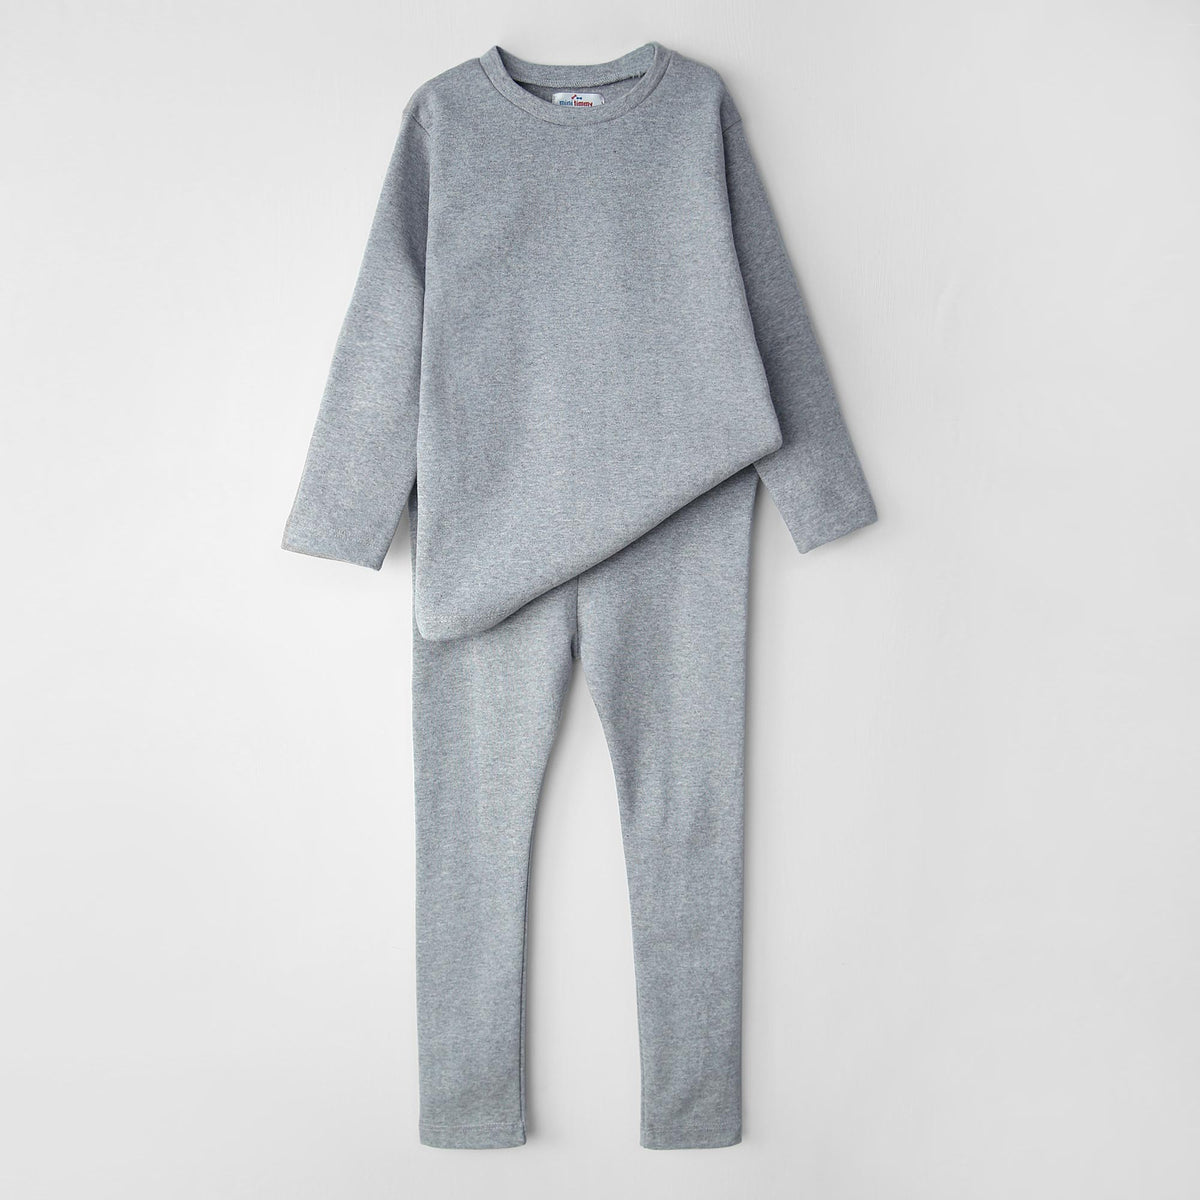 Premium Quality 2 Piece Gray Winter Inner Suit For Kids